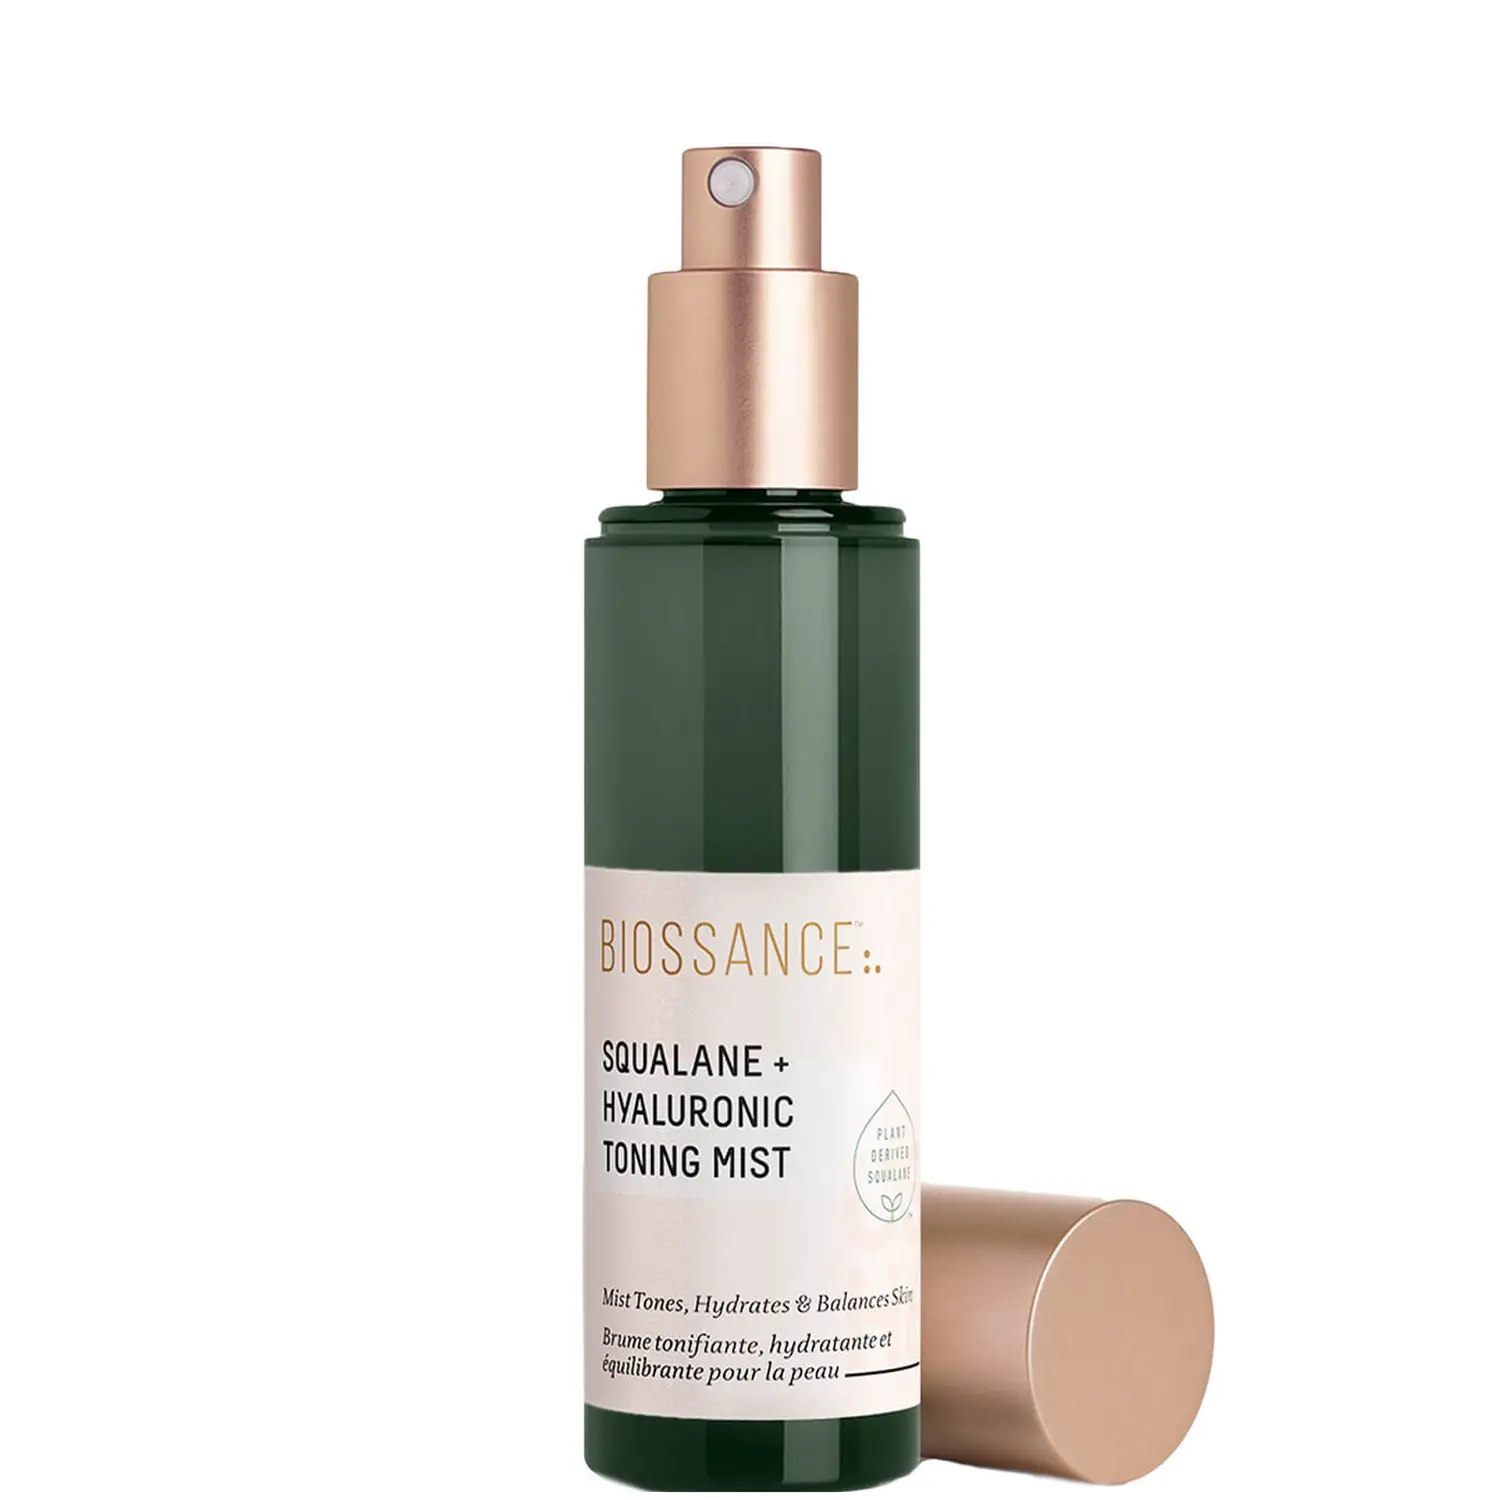 BIOSSANCE SQUALANE AND HYALURONIC TONING MIST 75ML £25.00